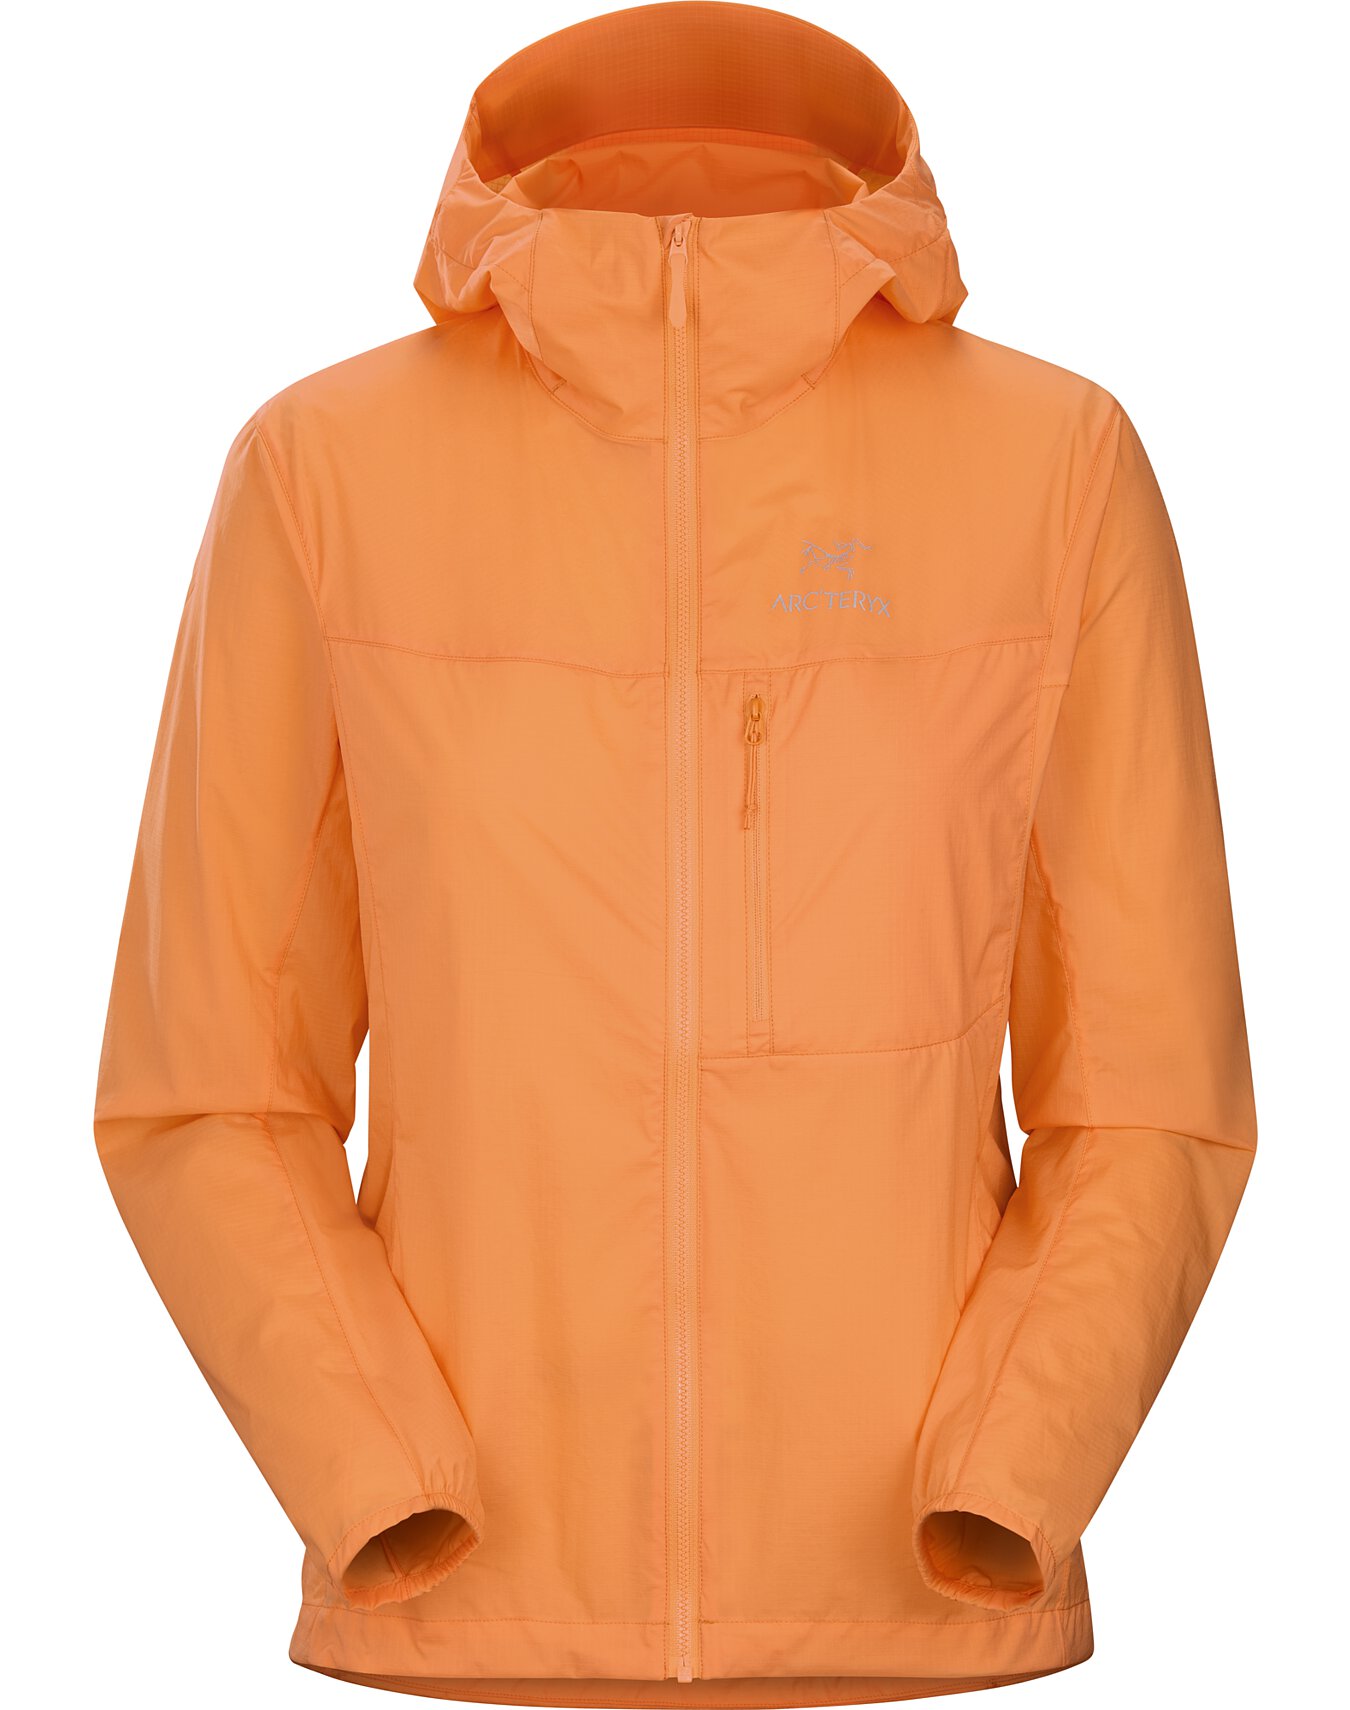 Womans Light Weight Hooded Jacket Hiking Snow Rain